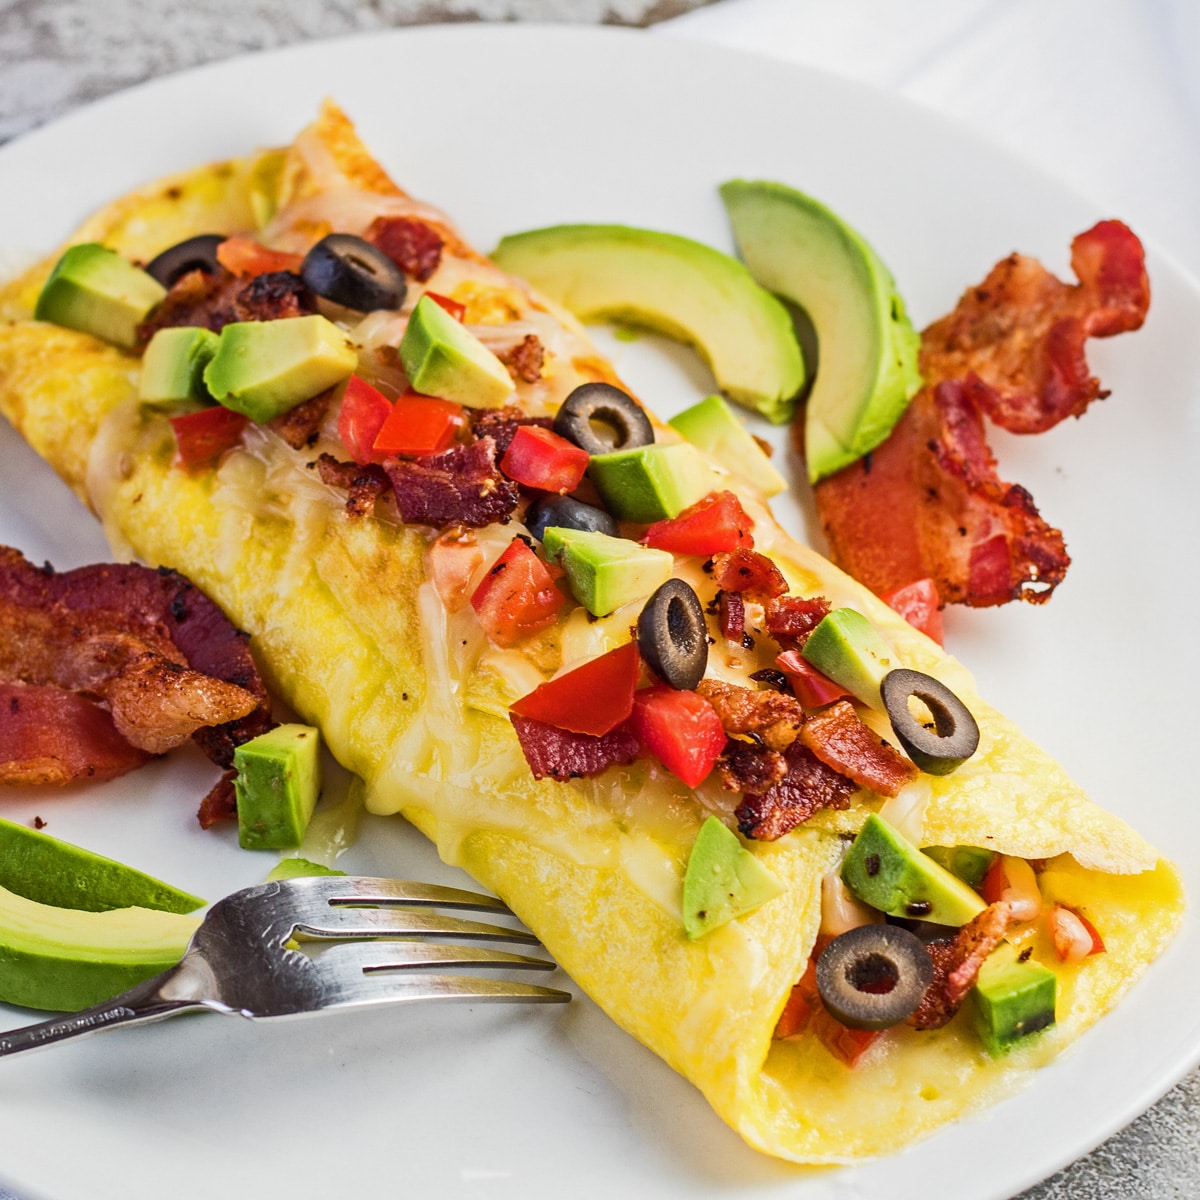 California omelet with bacon and avocado on a white plate.